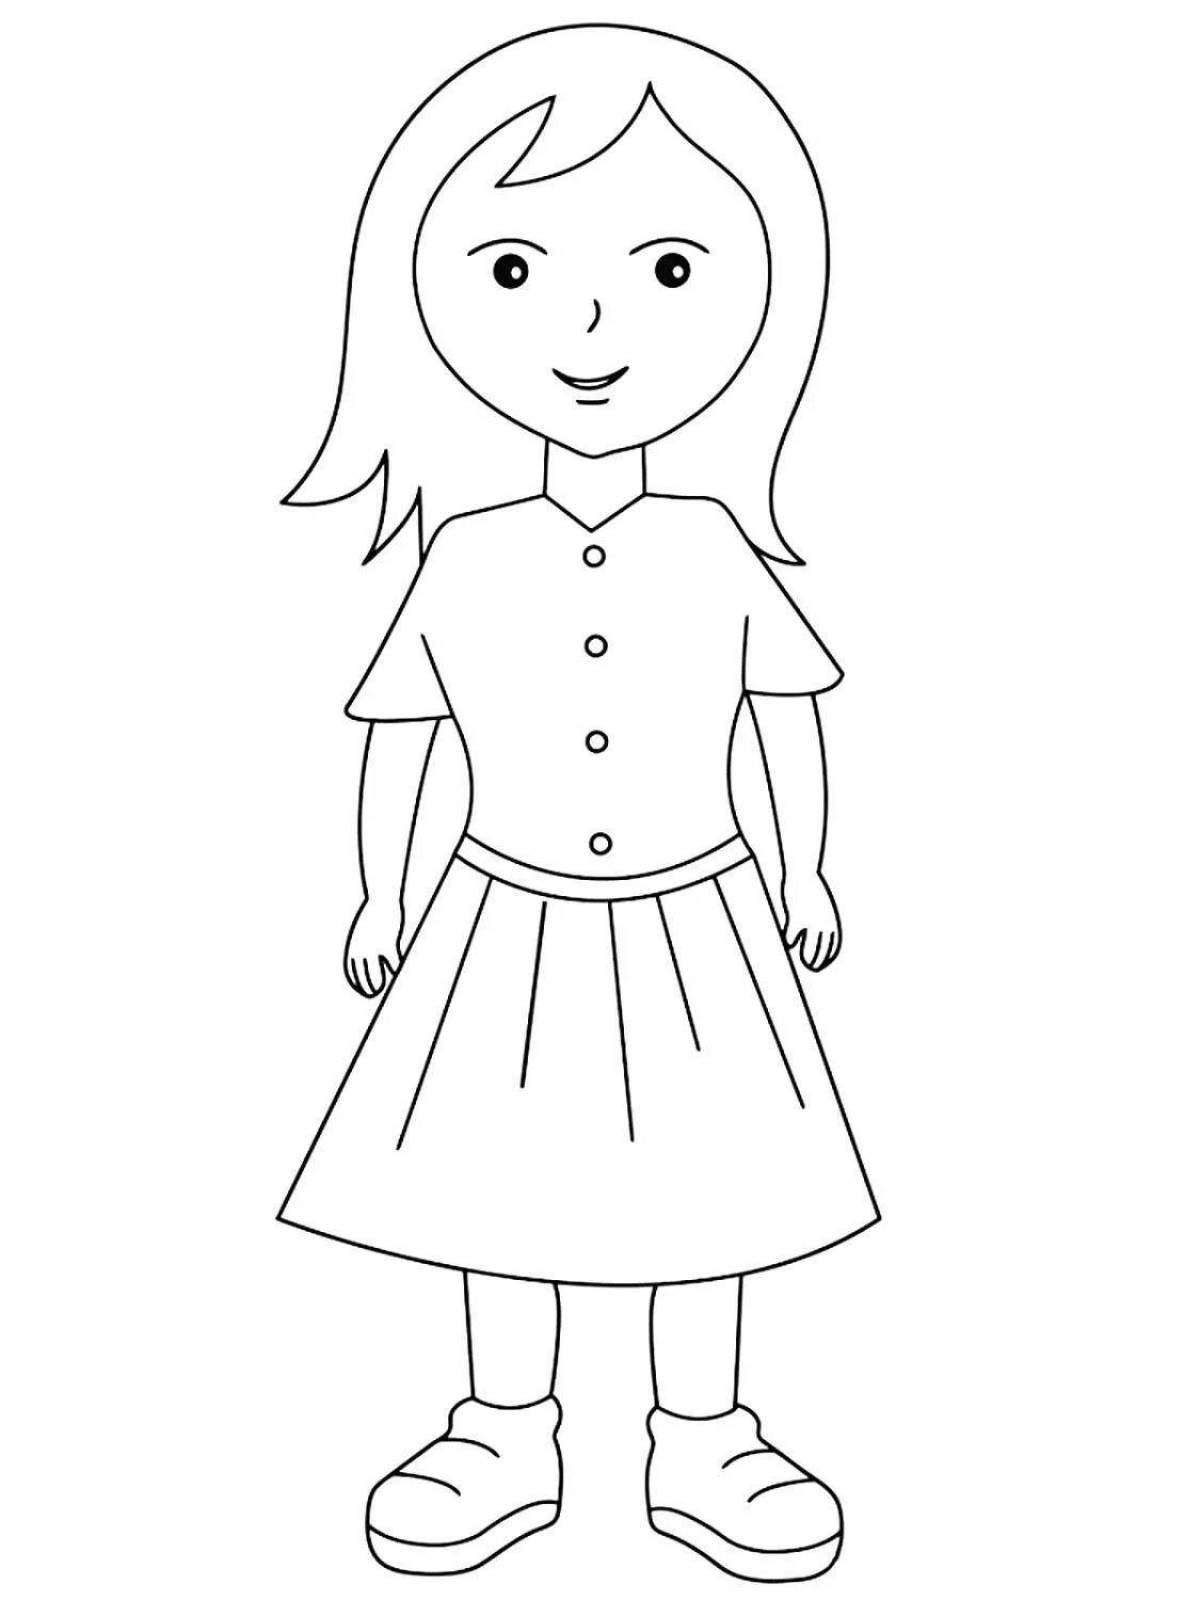 Amazing coloring pages people for girls